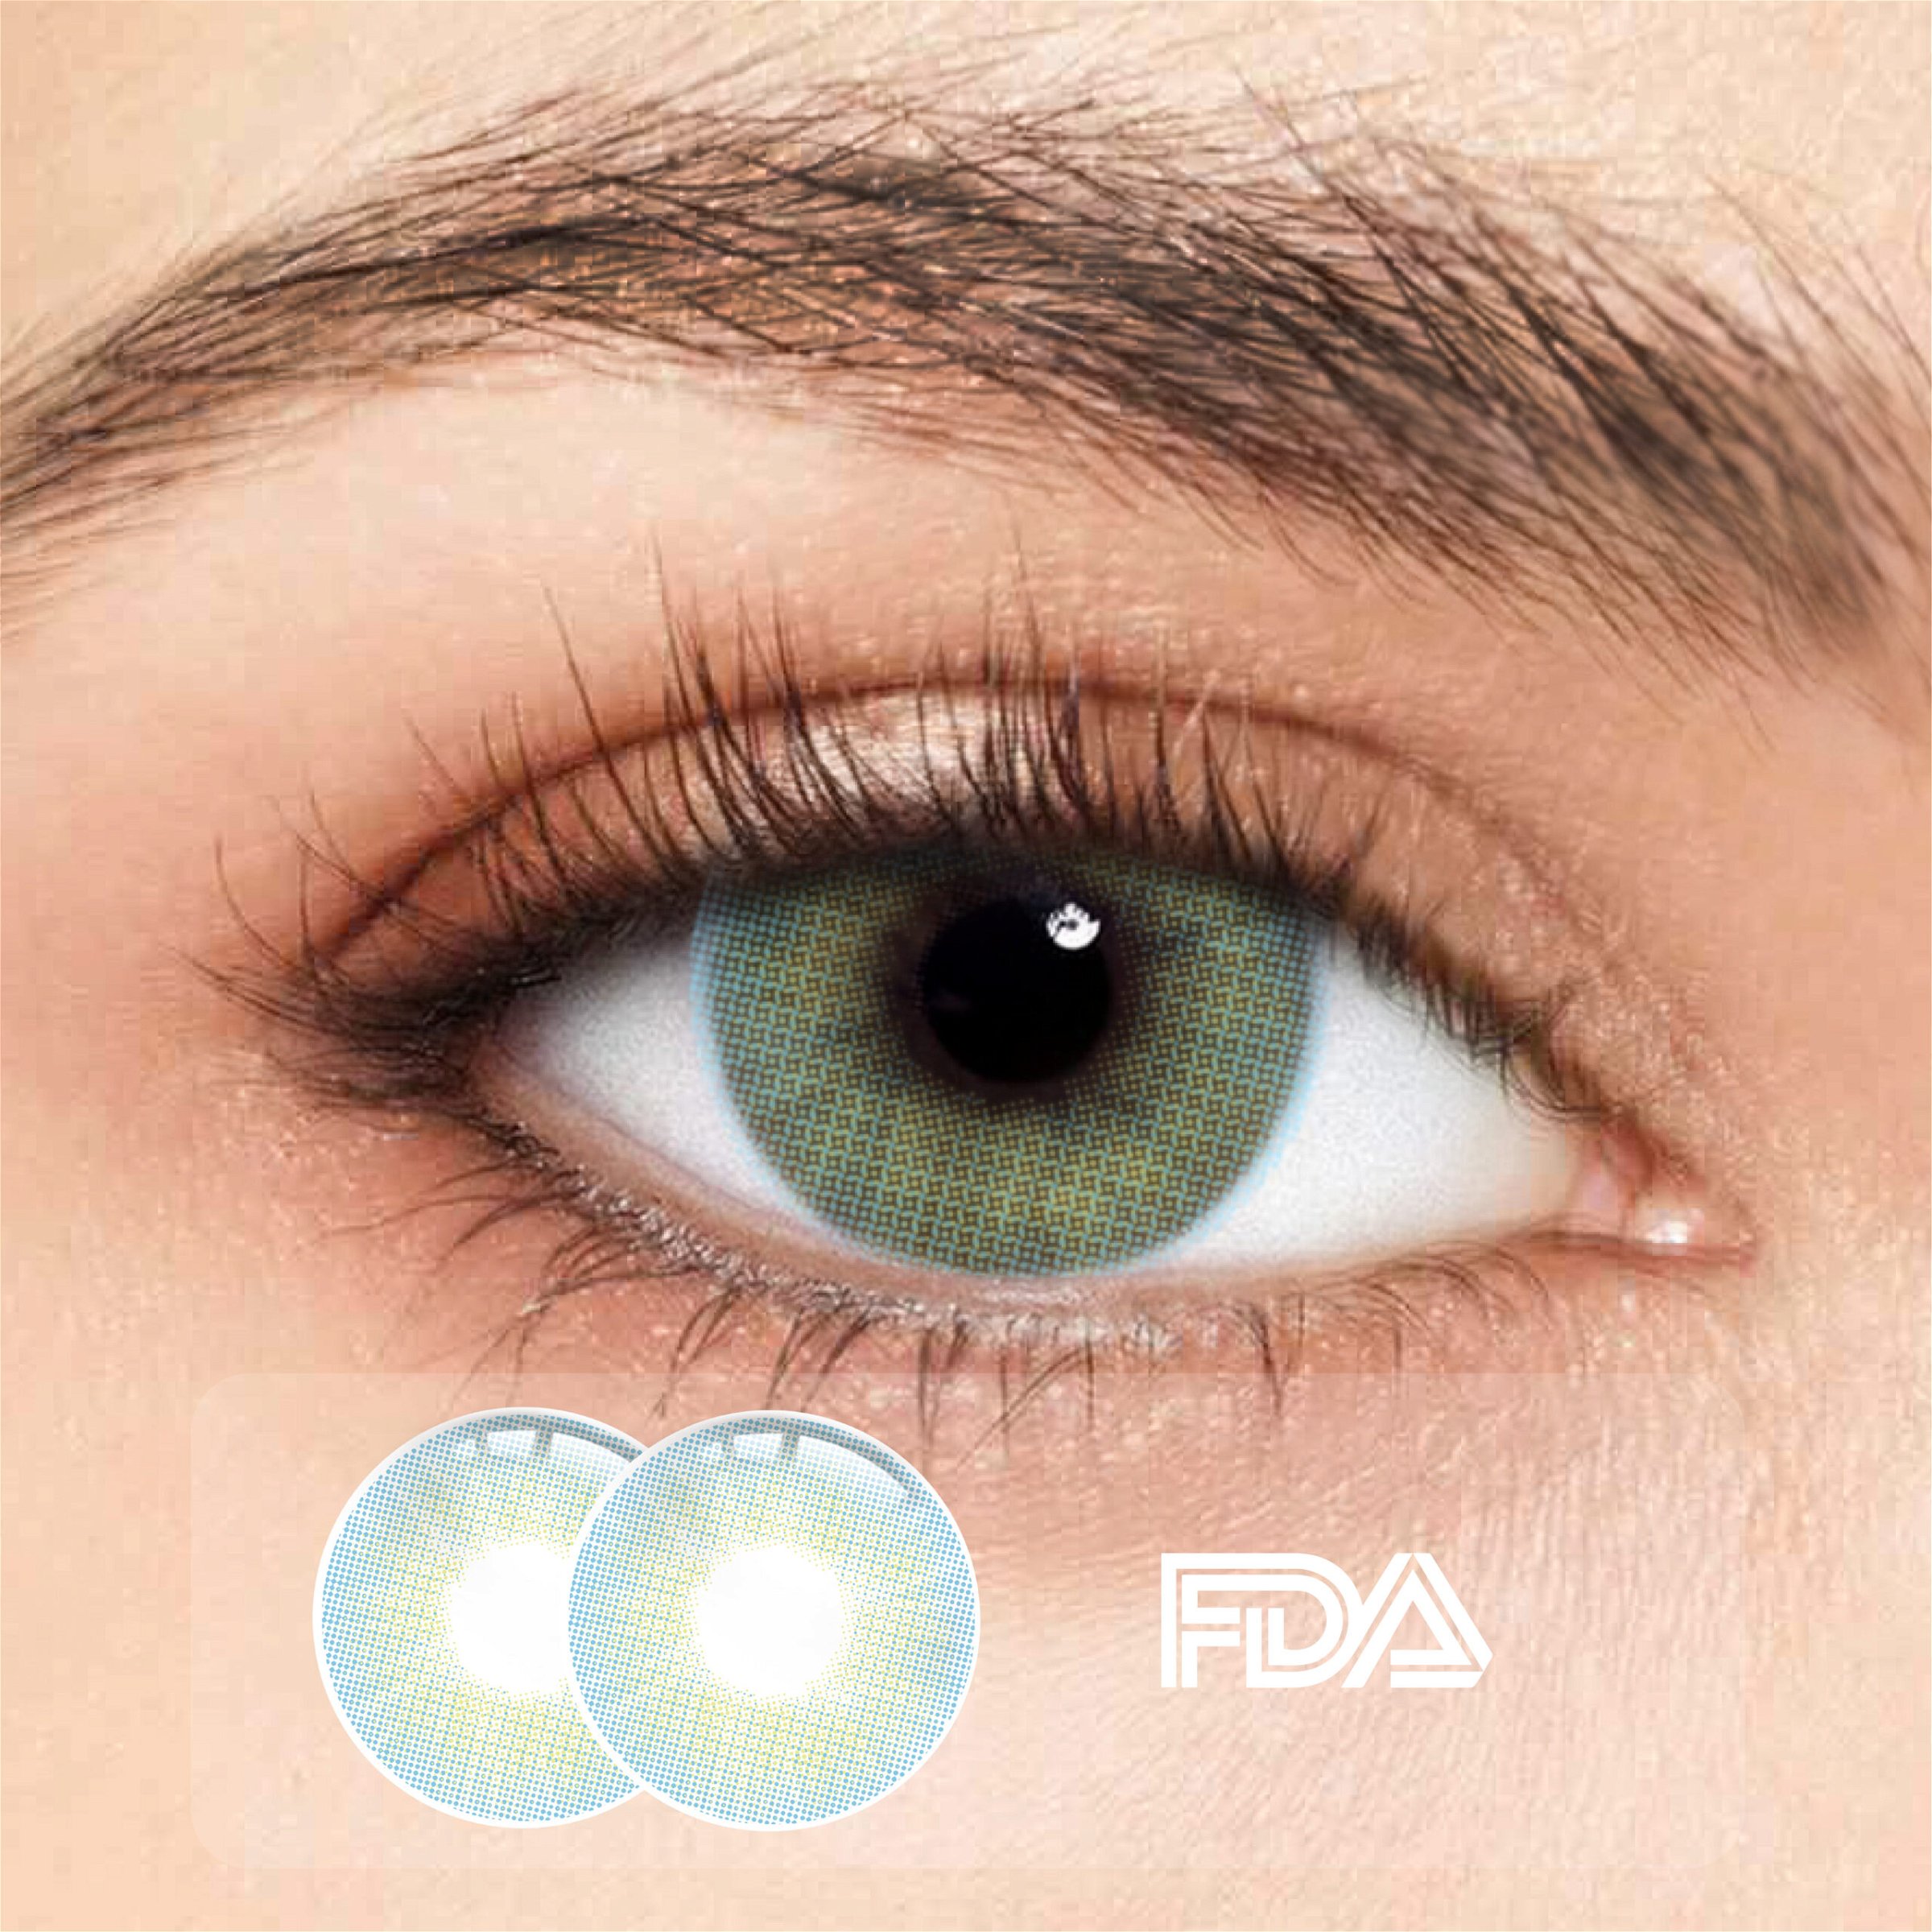 1Pair FDA Certified Contact Lens Eyes Beautiful Pupil Colorful Girl Cosplay Contact Lenses with degrees PHALAENOPSIS BLUE